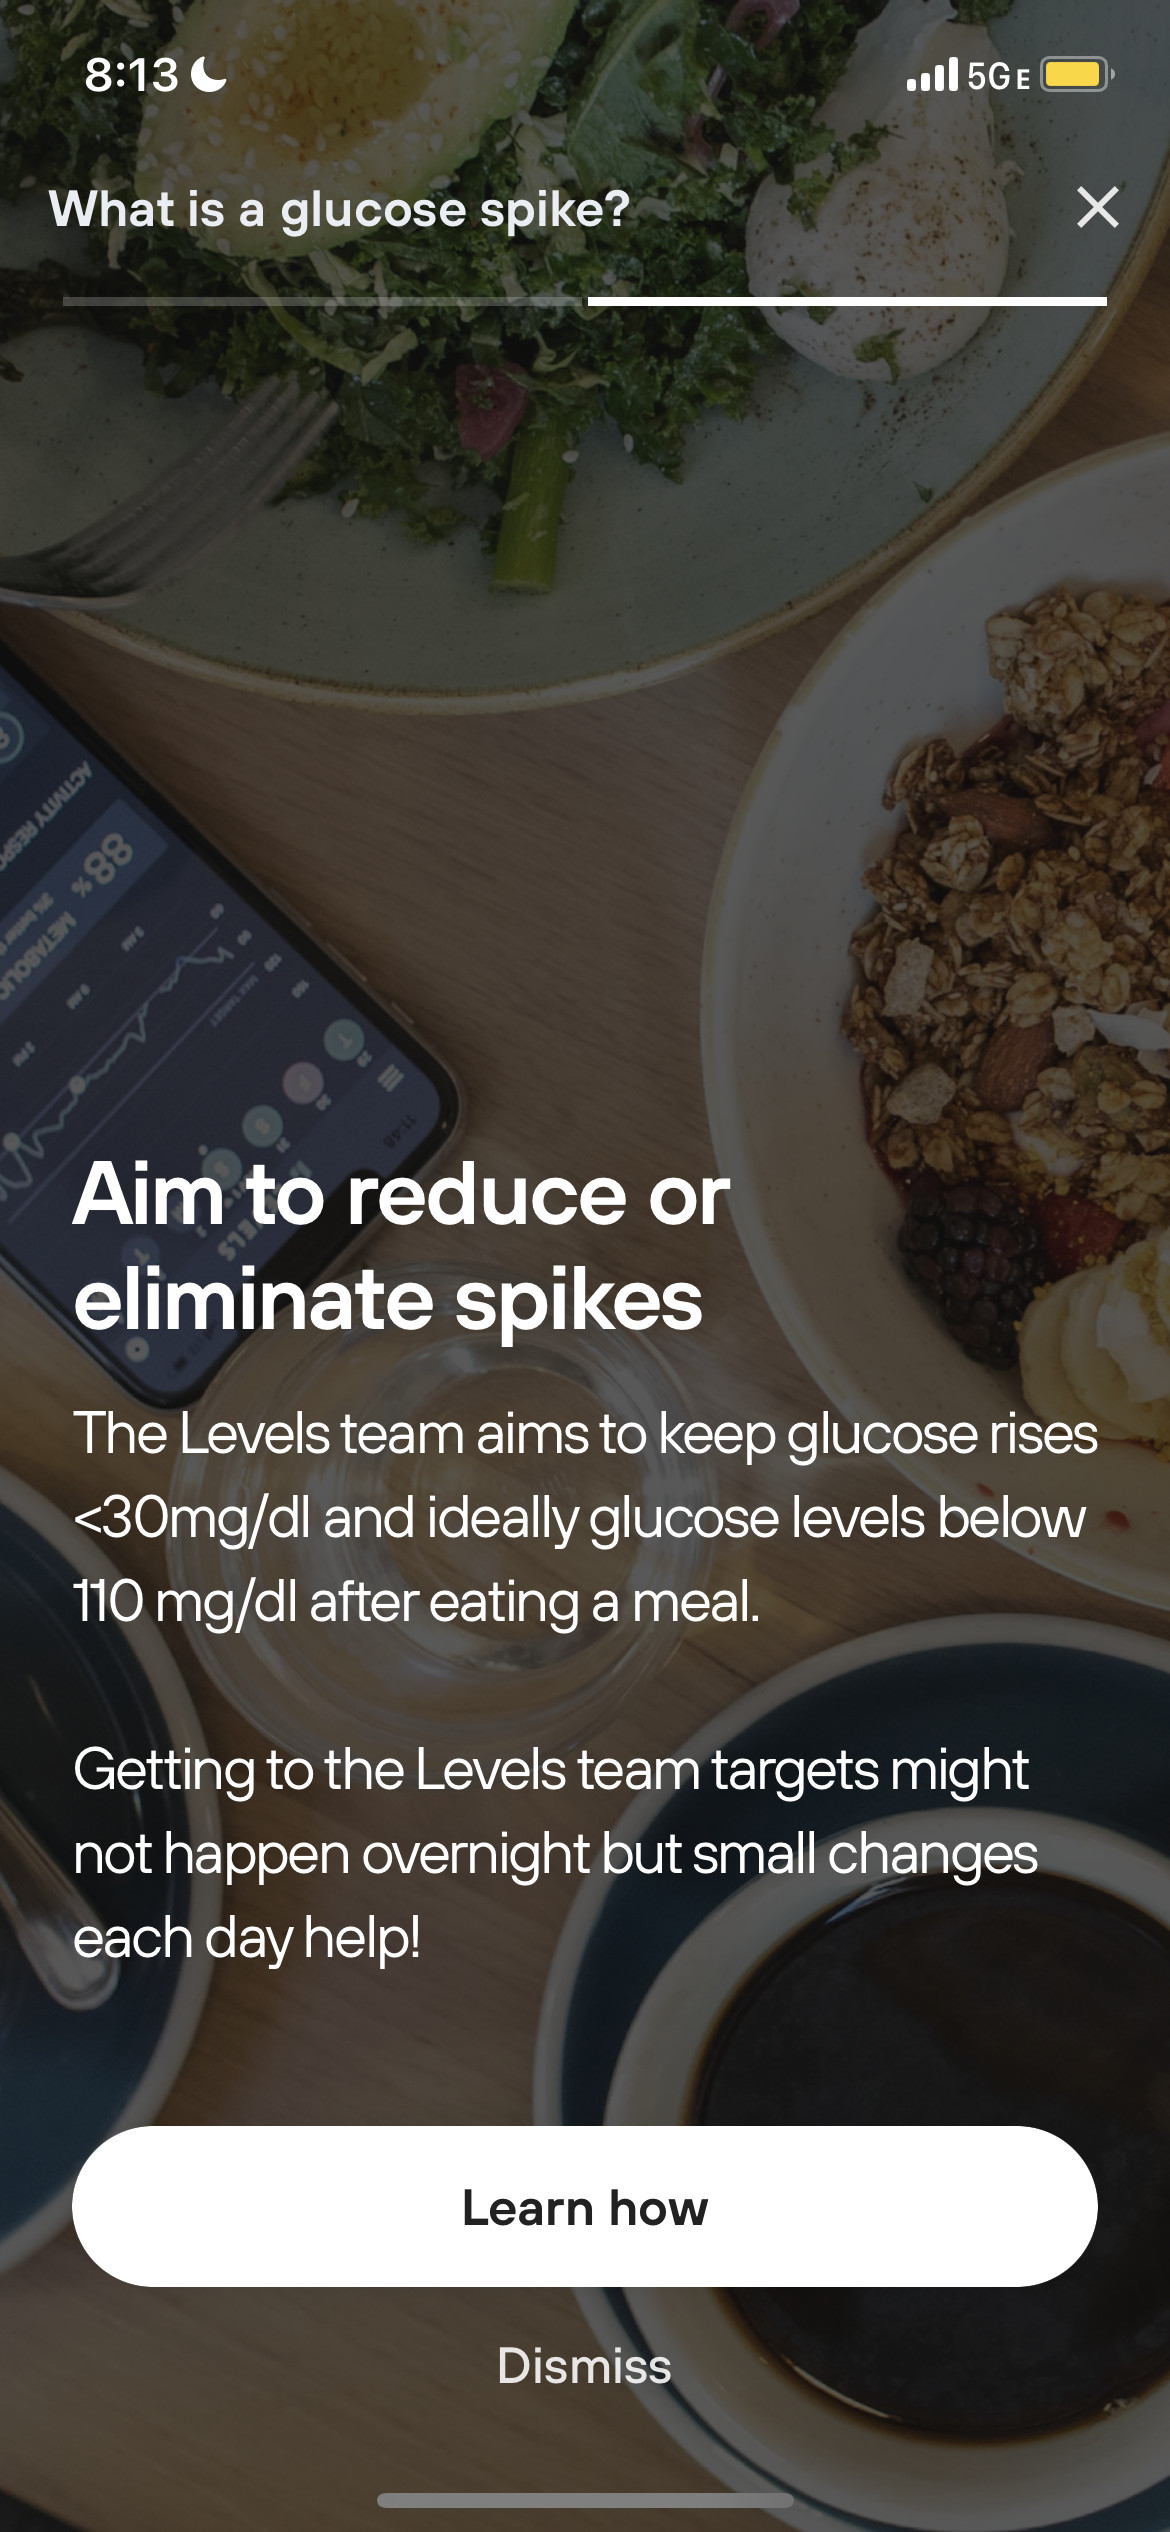 A screenshot of Nicole’s Dexcom and Levels app that says, “Aim to reduce or eliminate spikes. The Levels team aims to keep glucose rises <30mg/dl and ideally glucose levels below 110 mg/dl after eating a meal. Getting to the levels team targets might not happen overnight but small changes each day help!”